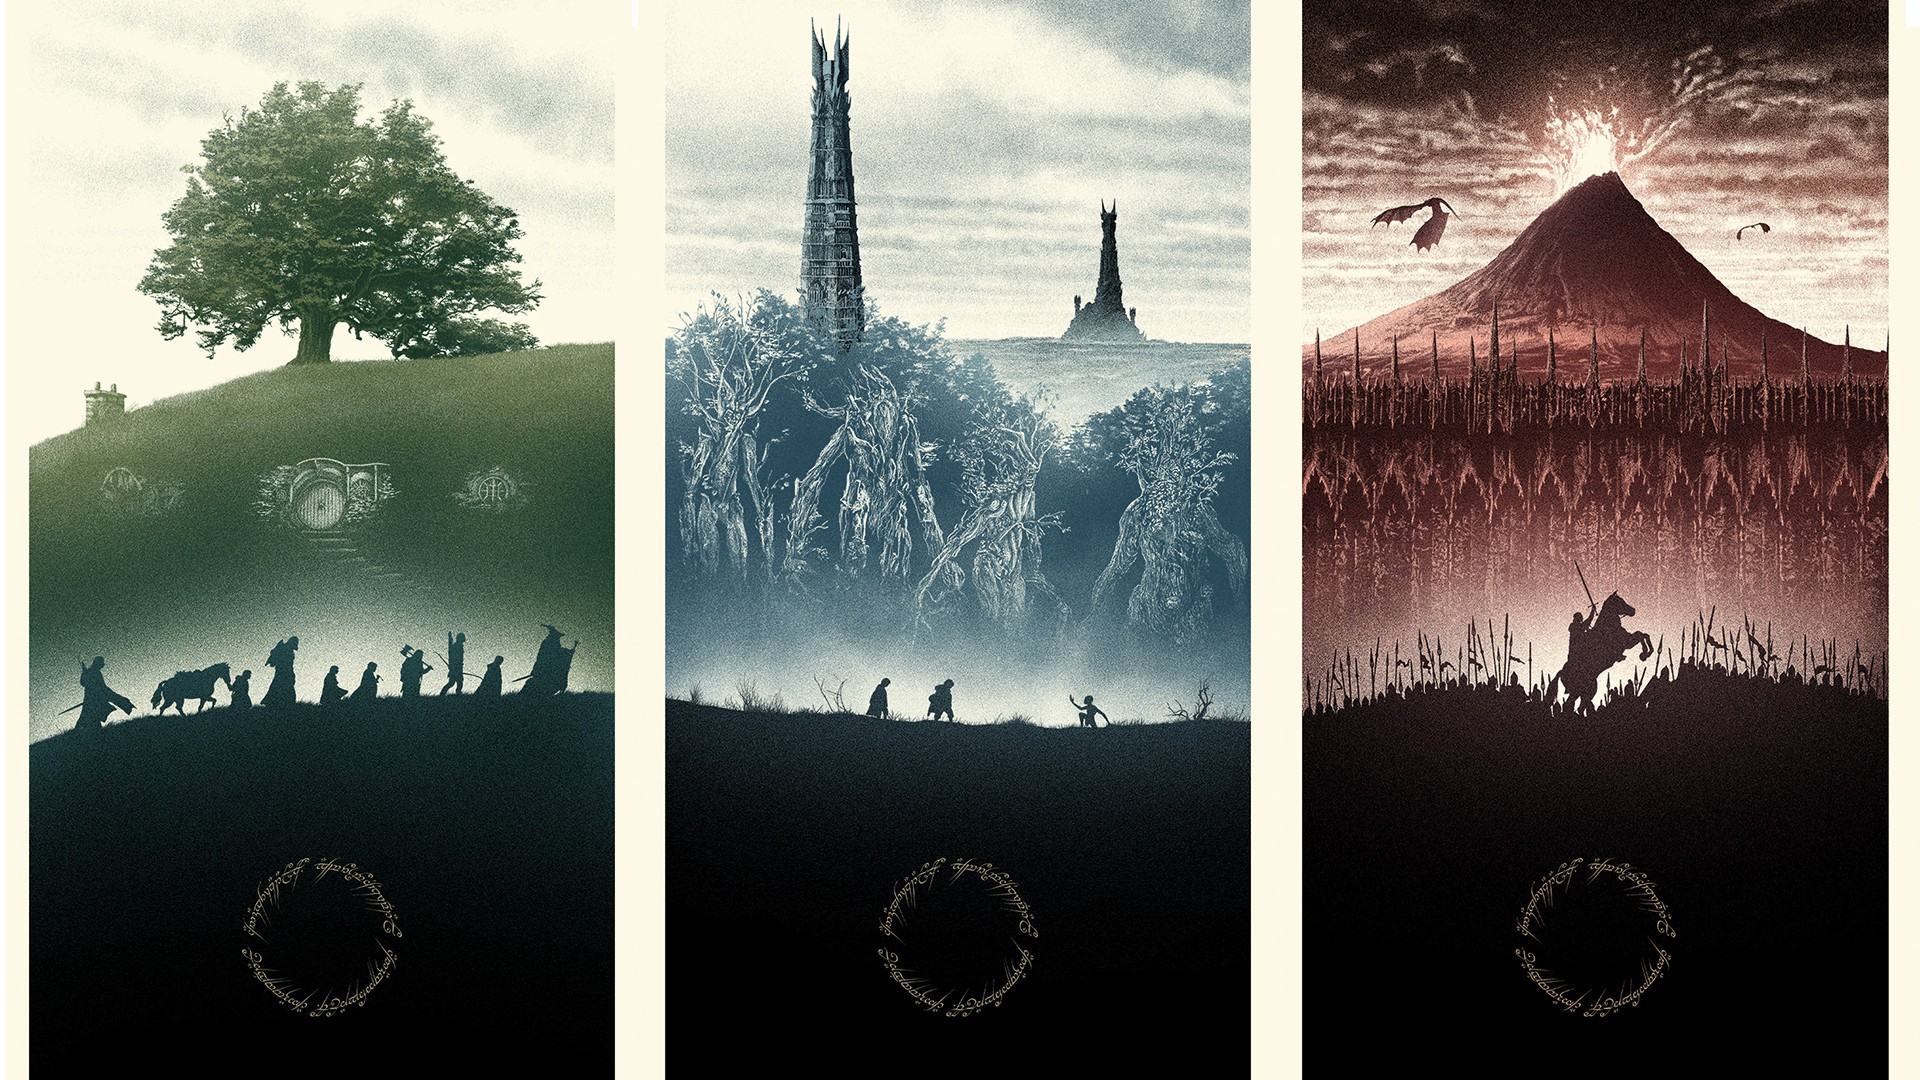 General 1920x1080 The Lord of the Rings The Shire Bag End Mordor collage Isengard Orthanc fantasy art The Hobbit